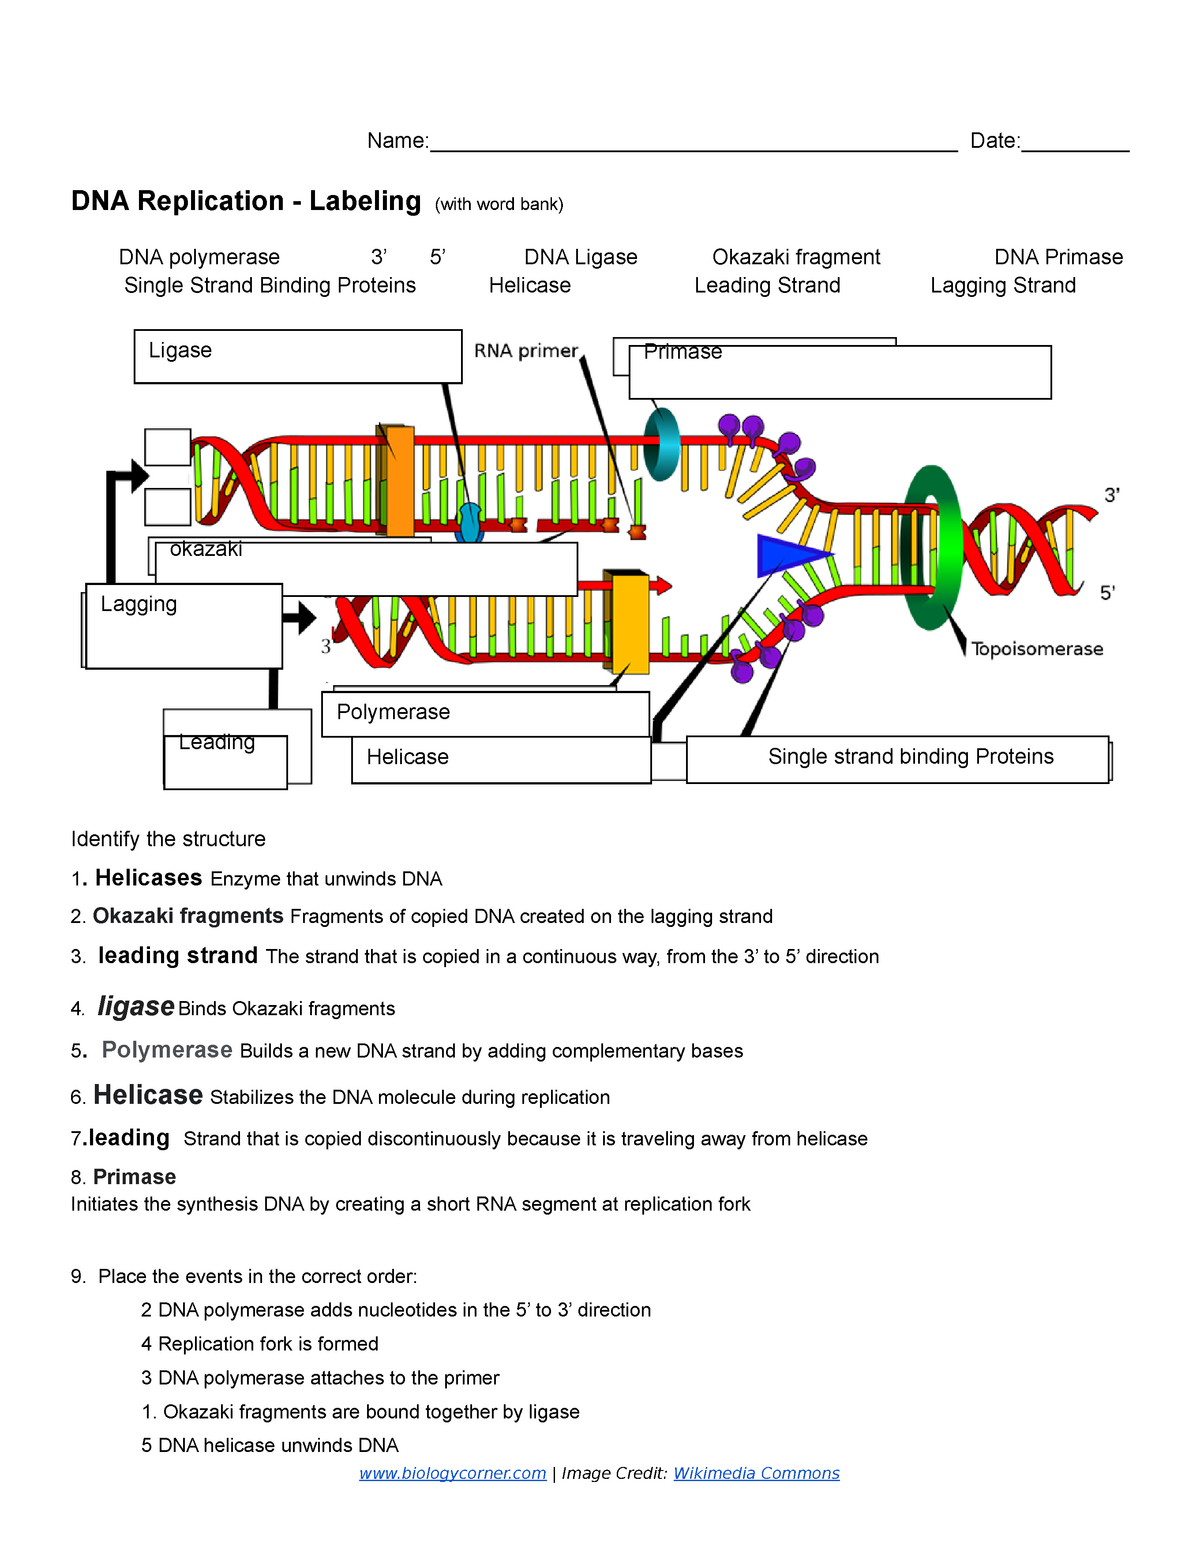 Copy of DNA Replication - Labeling 22 - Name: - StuDocu With Dna And Replication Worksheet Answers